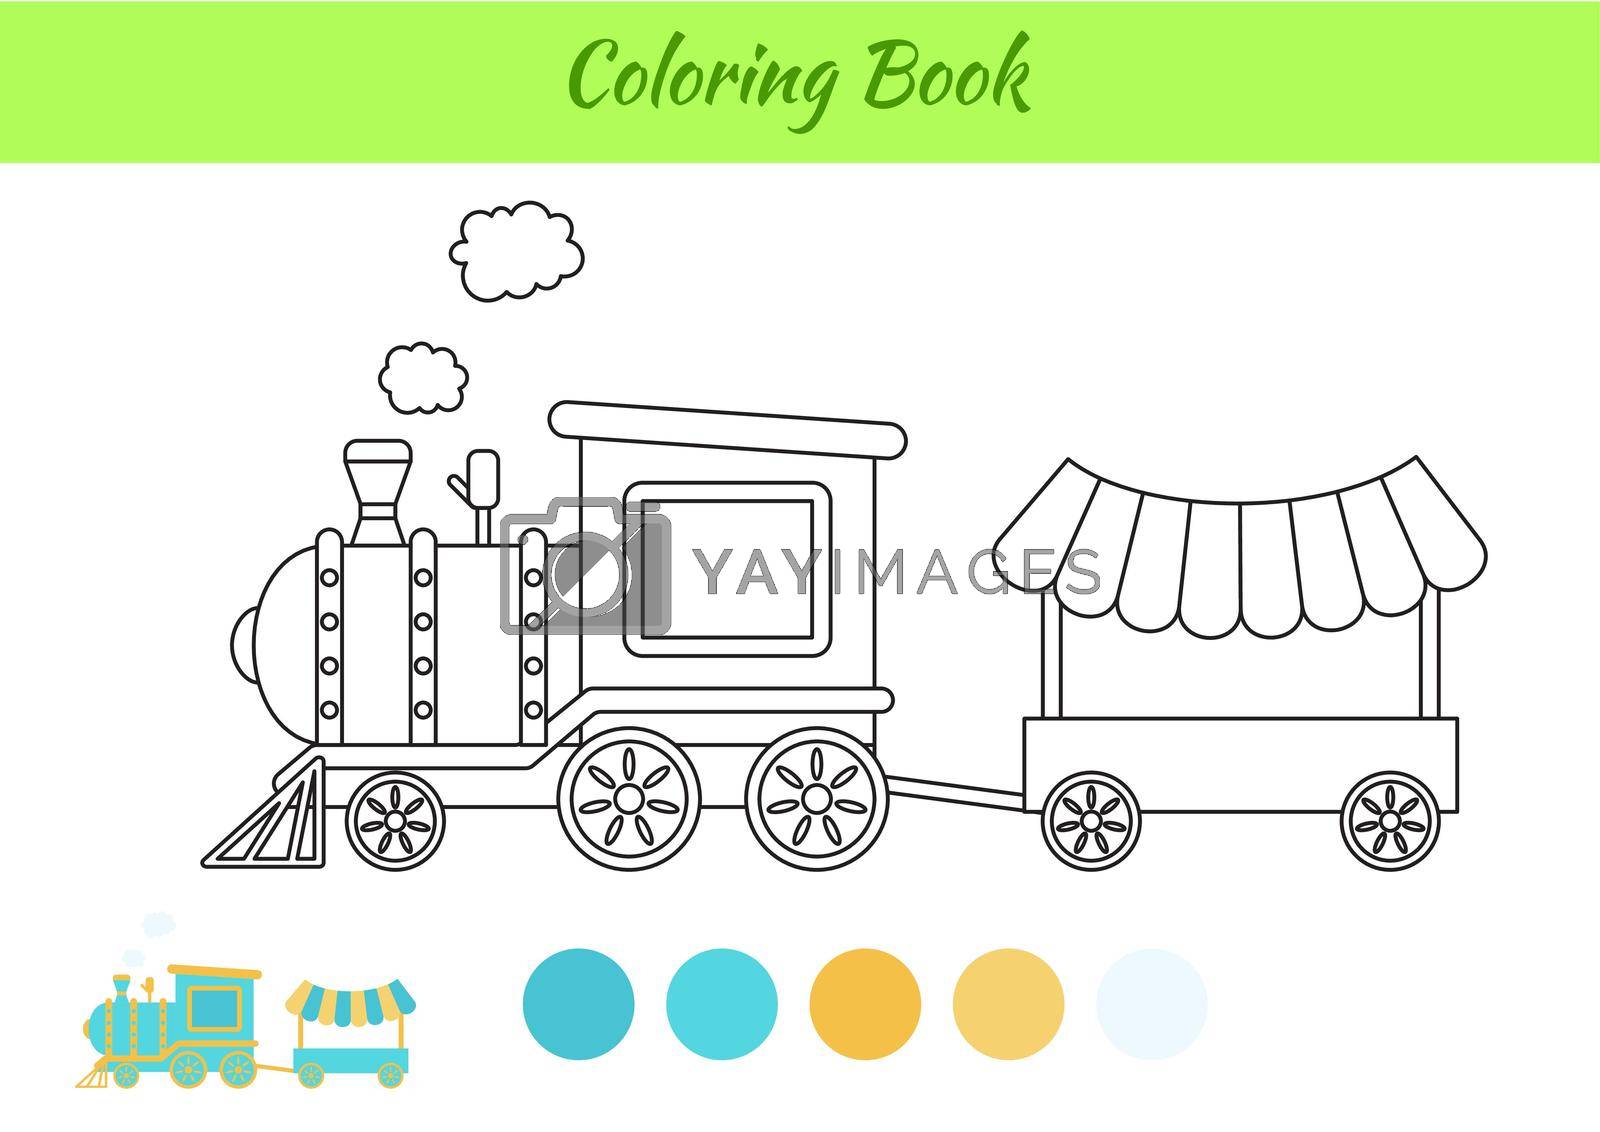 Coloring book train for kids. Printable worksheet. Educational activity page for preschool years kids and toddlers with transport. Cartoon colorful vector illustration.